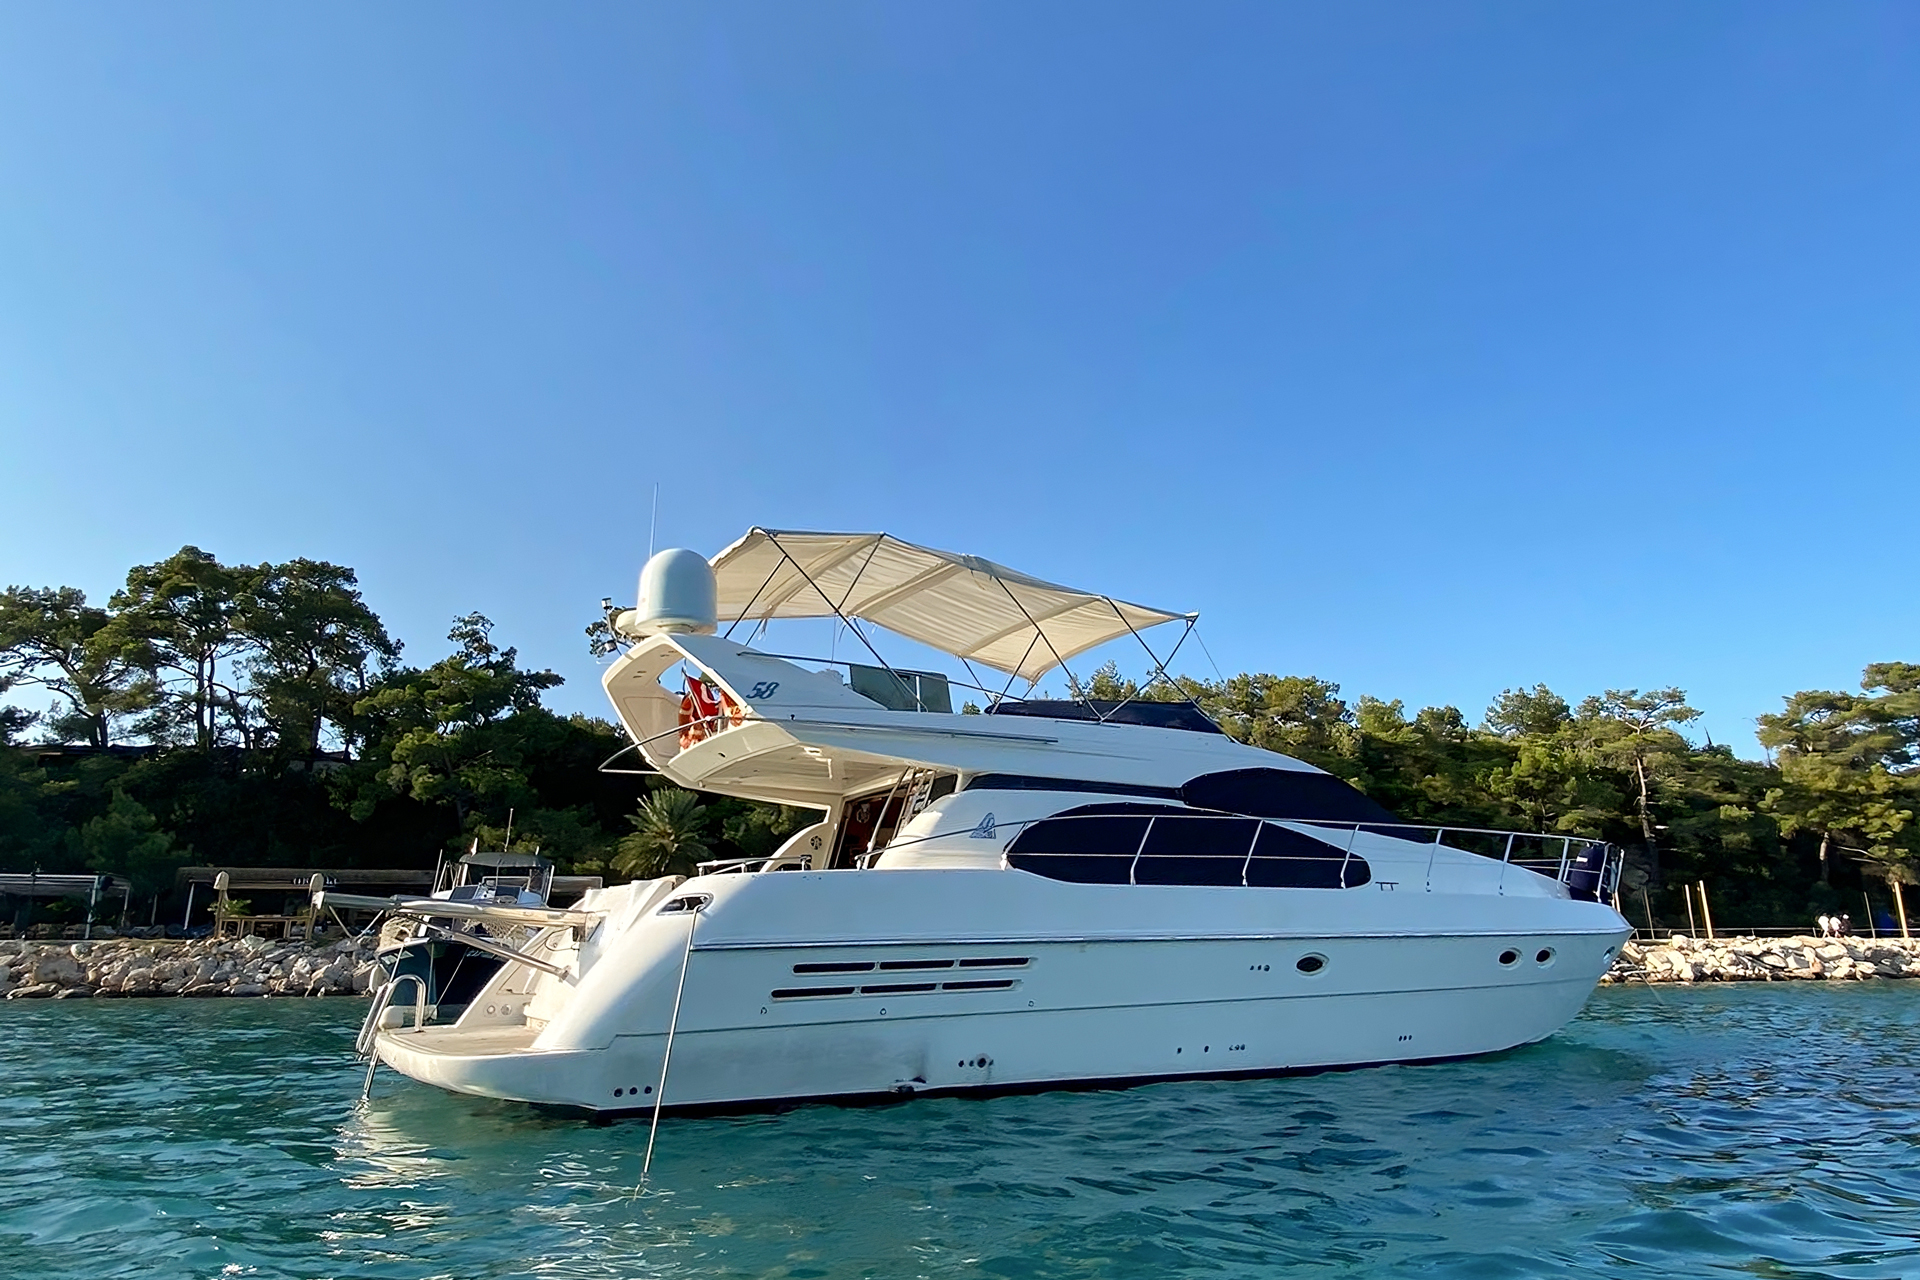 Private Yacht for Antalya DAily Yacht Tour